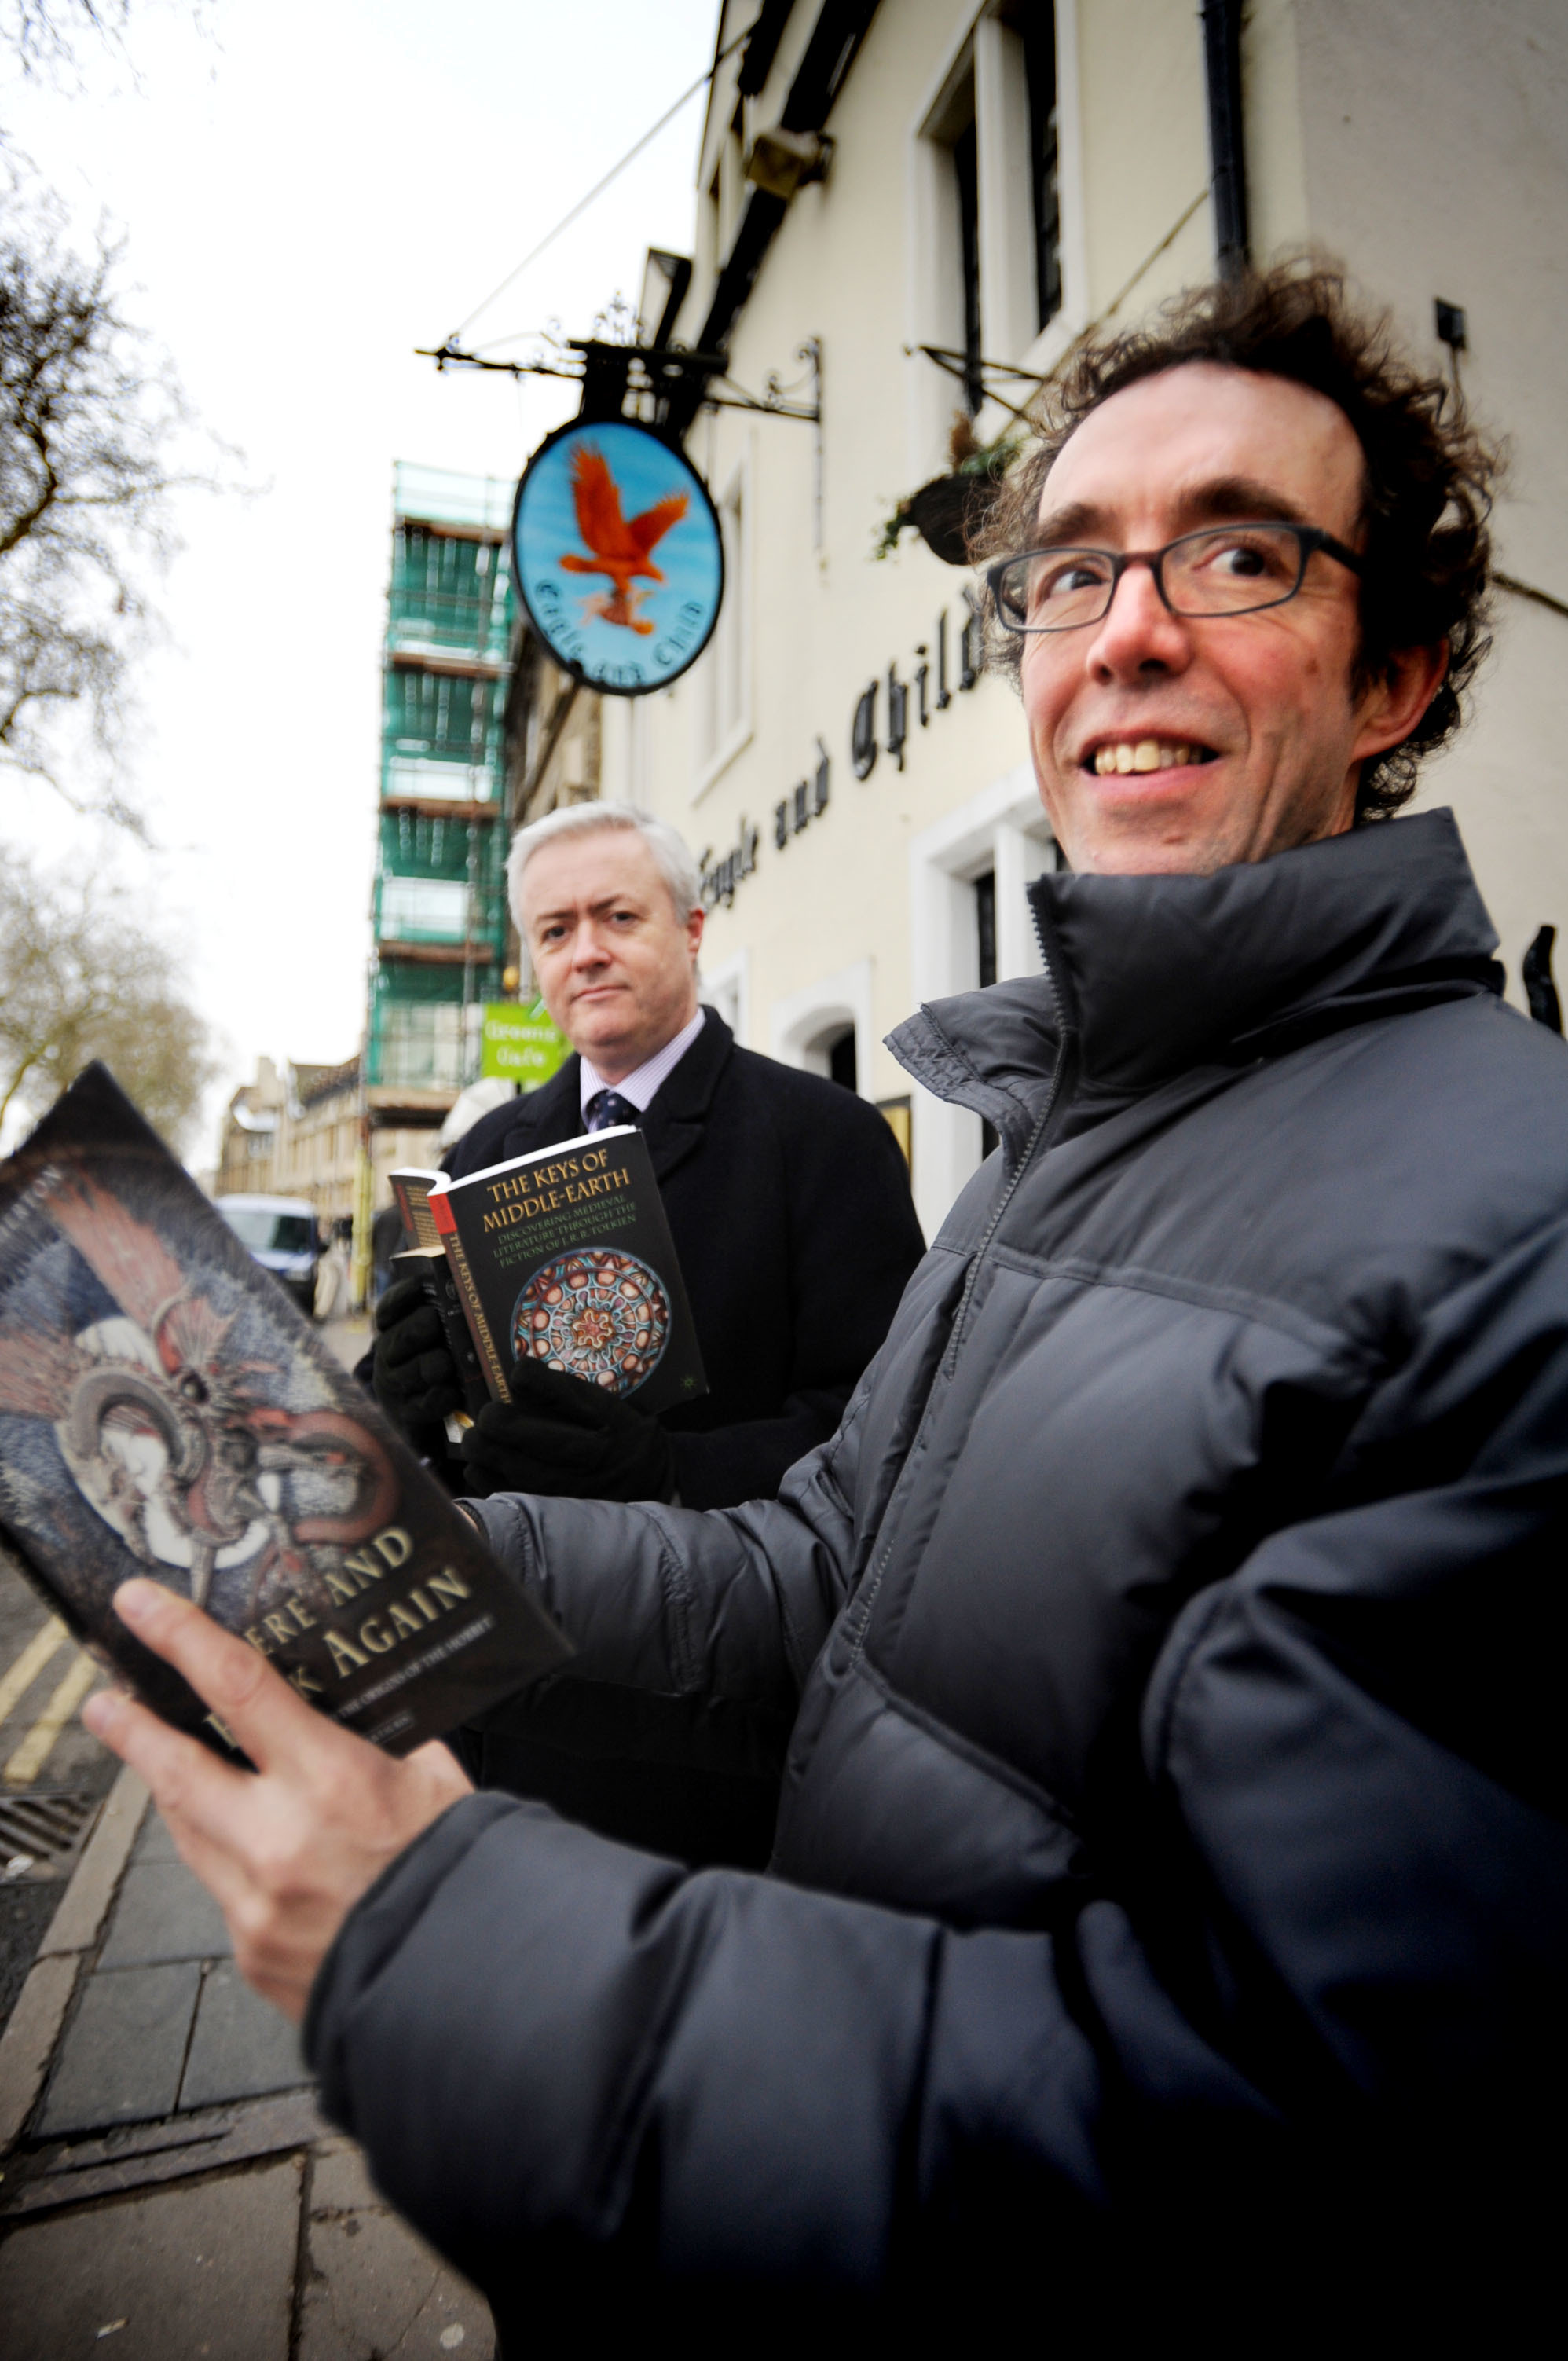 Job name: Tolkien teaching PictureSales Ref: OX56981 Notes: Tolkien lectures are launching a Tolkien Spring School for the public to learn more about him and his books and Oxford. L-R stuart Lee (English Faculty) and Mark Atherton (Lecturer in English) ou